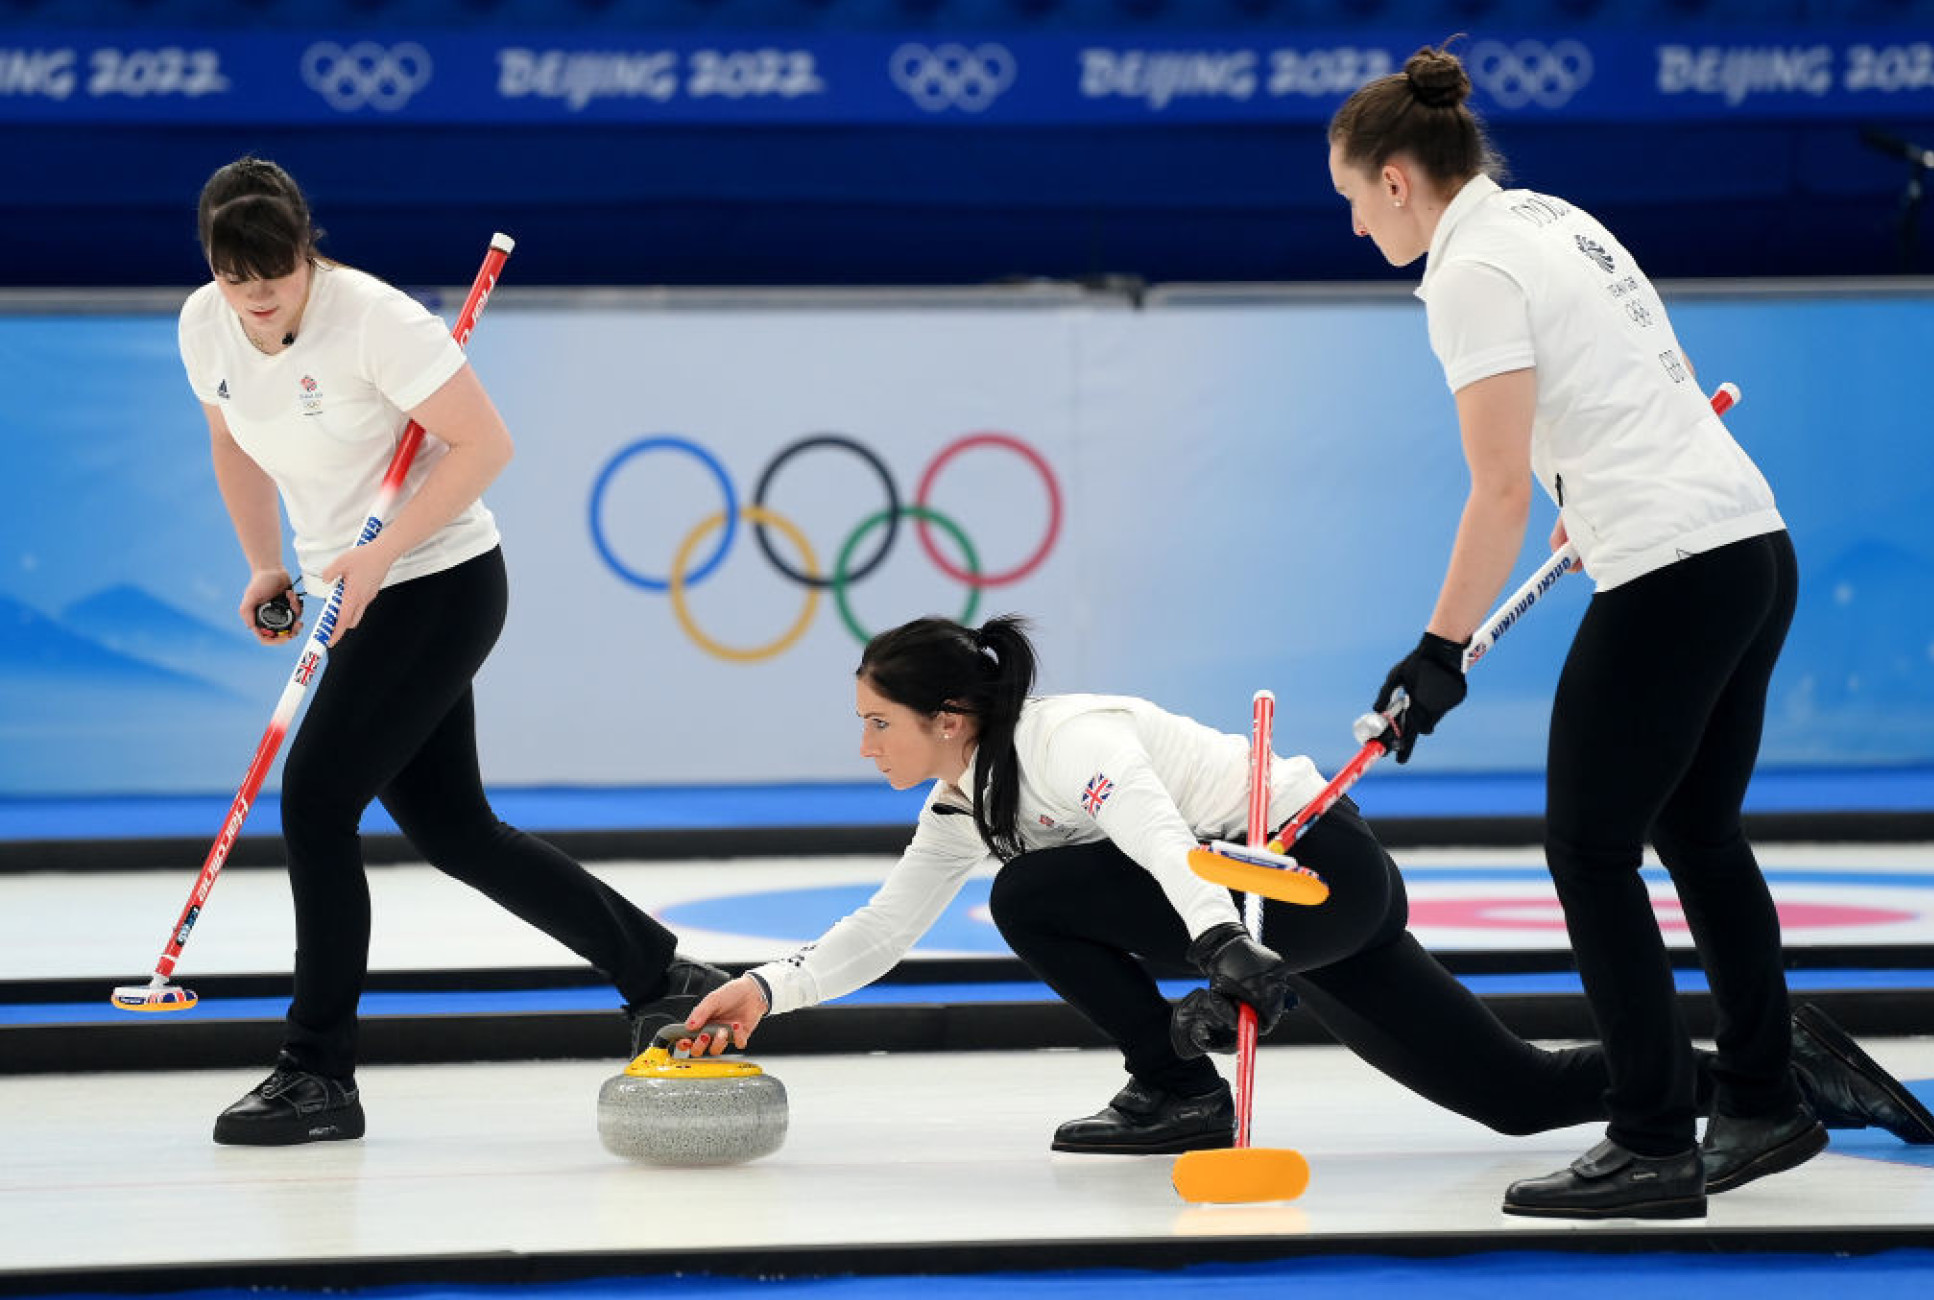 a curling match with three women